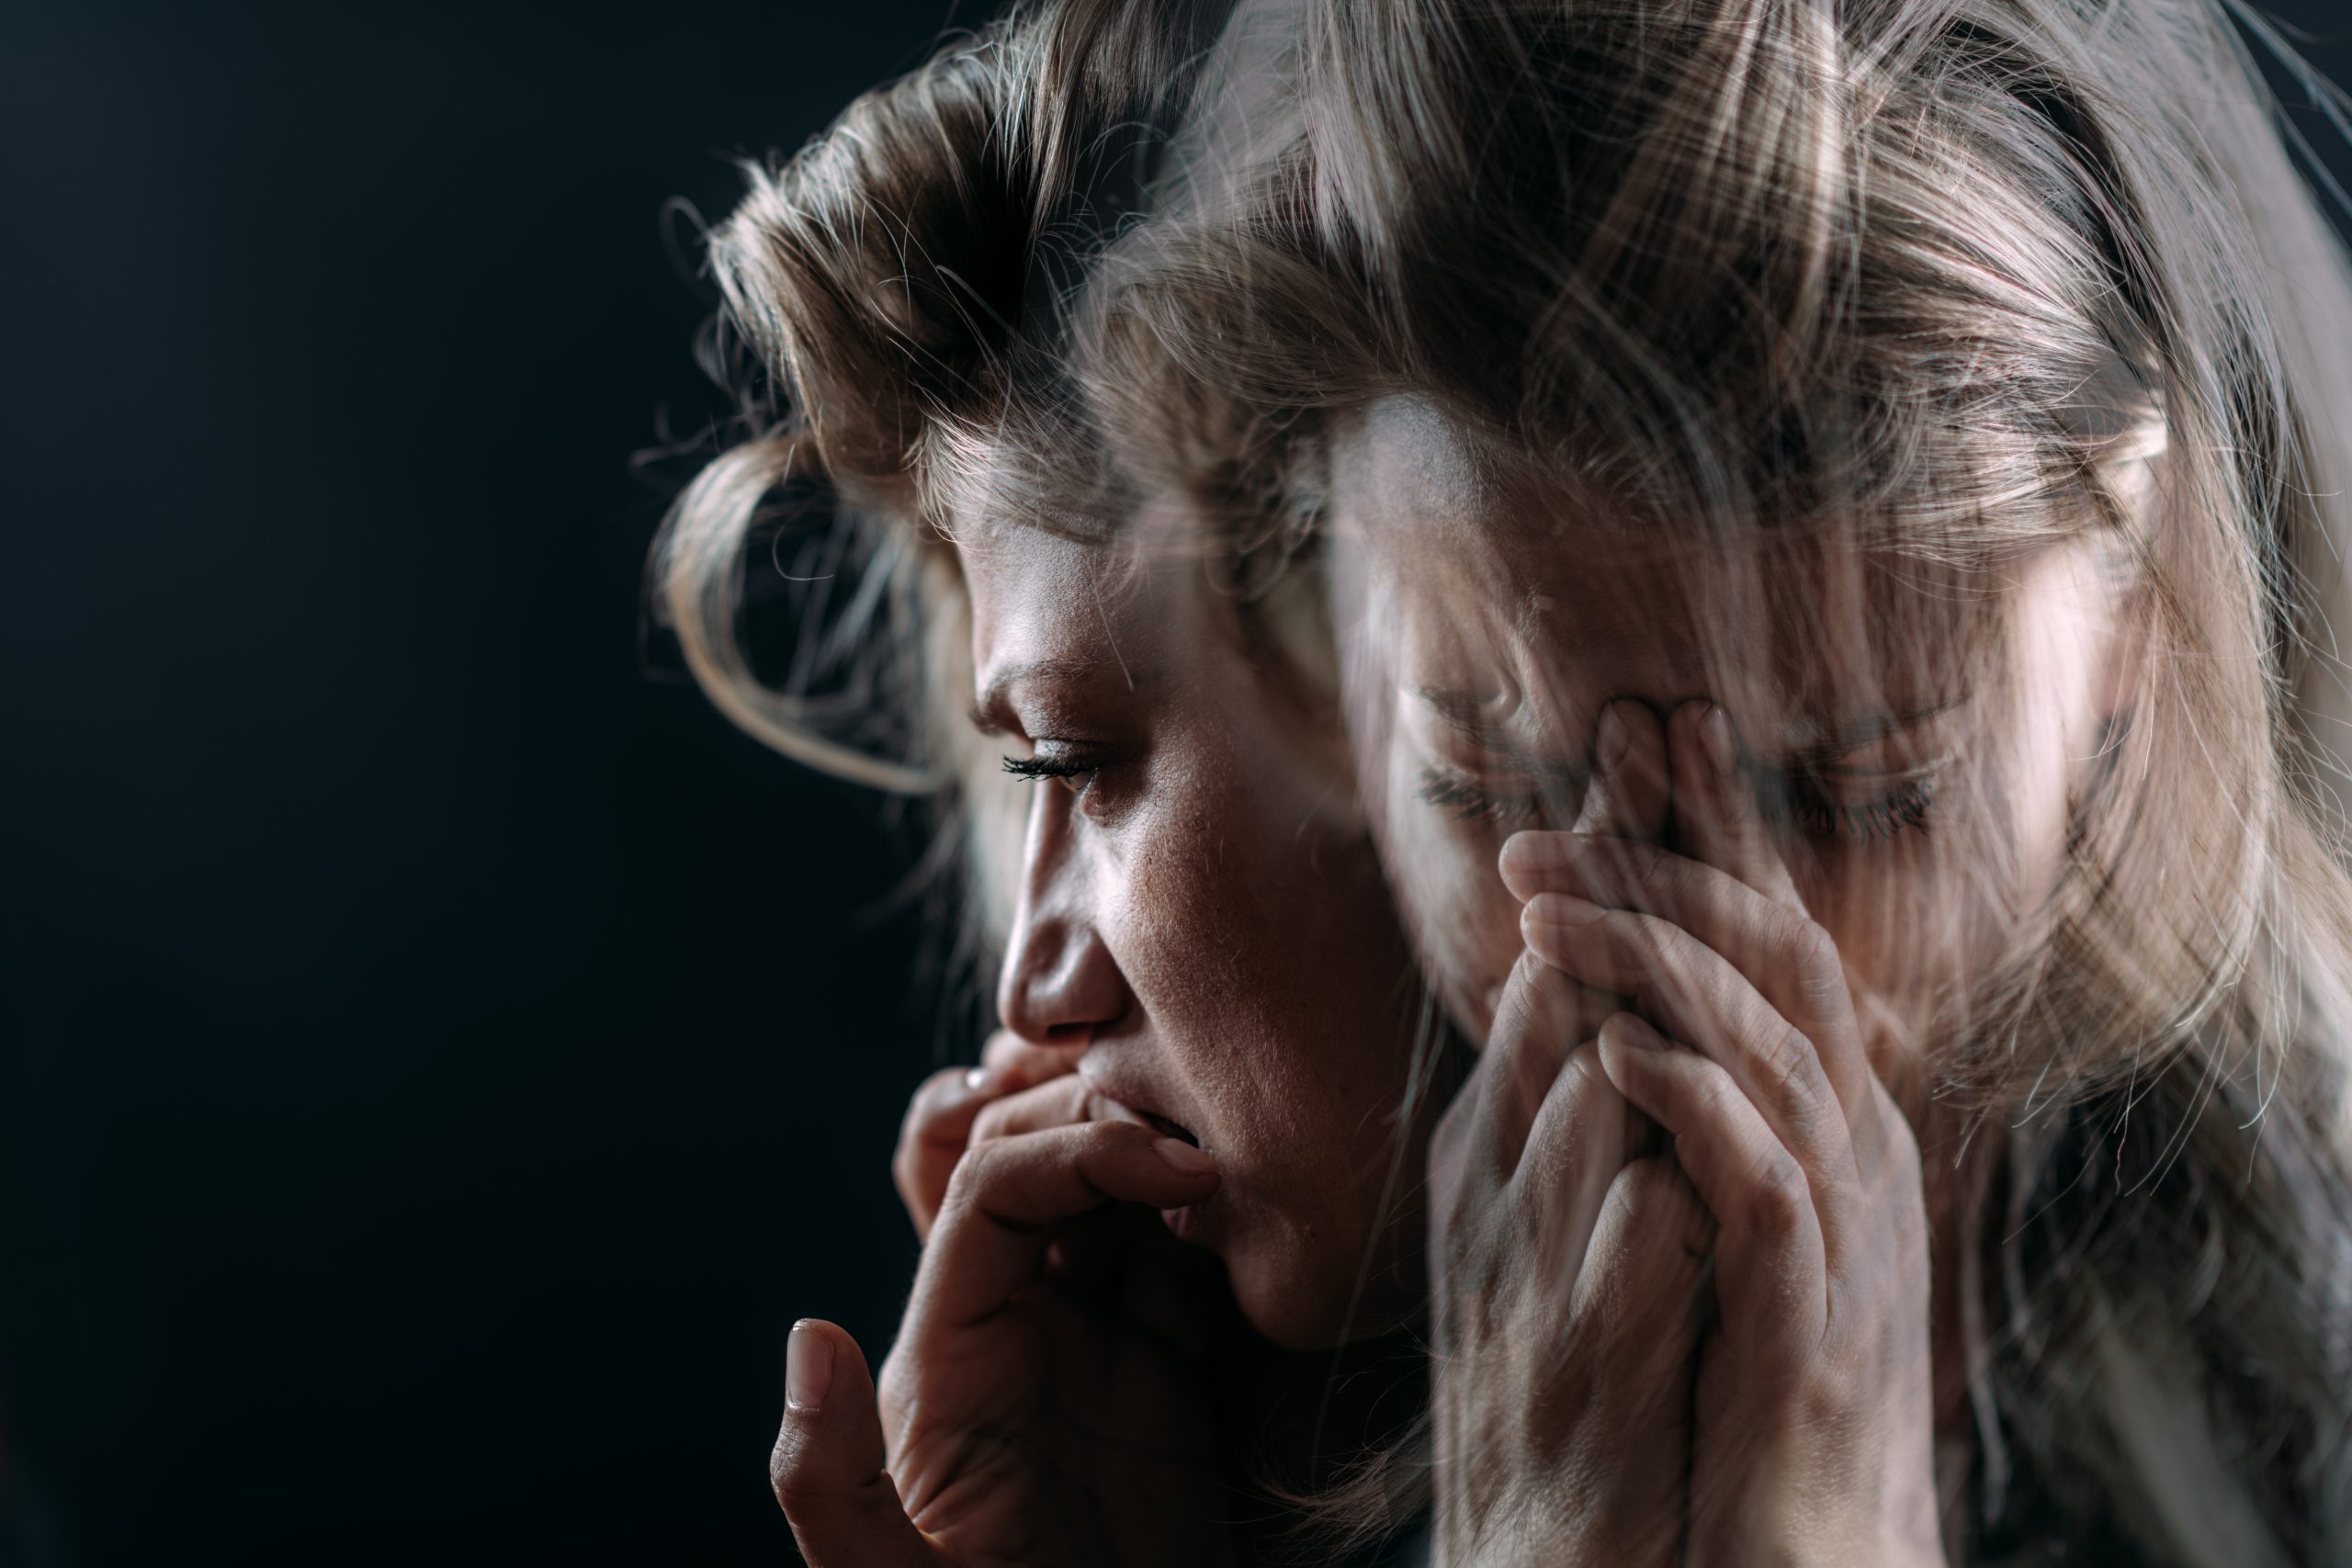 A blurred double exposure of a woman with light brown hair holding her head in distress reflects the urgency for trauma treatment. Her face shows signs of anxiety, and her hands cover parts of her face. The dark background emphasizes her emotional state, echoing the atmosphere of a trauma clinic.